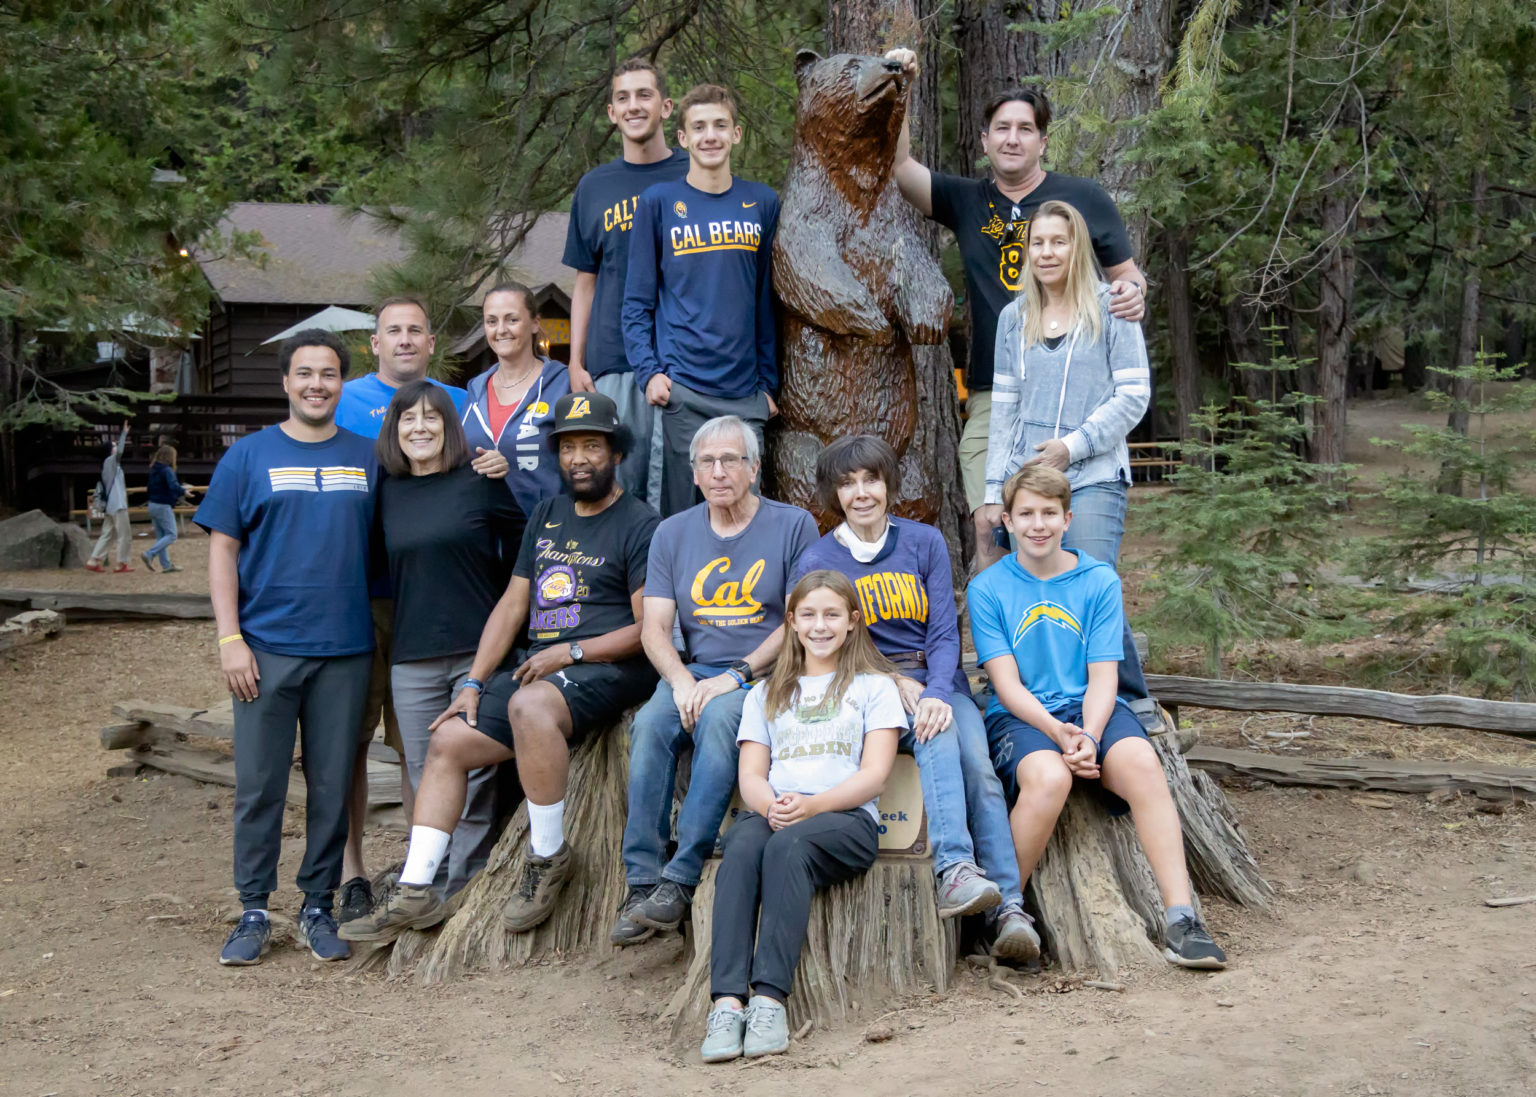 A multi-generational family dressed in Cal garb and blue and gold posing for a family portrait in front of the wooden Bear statue in camp.